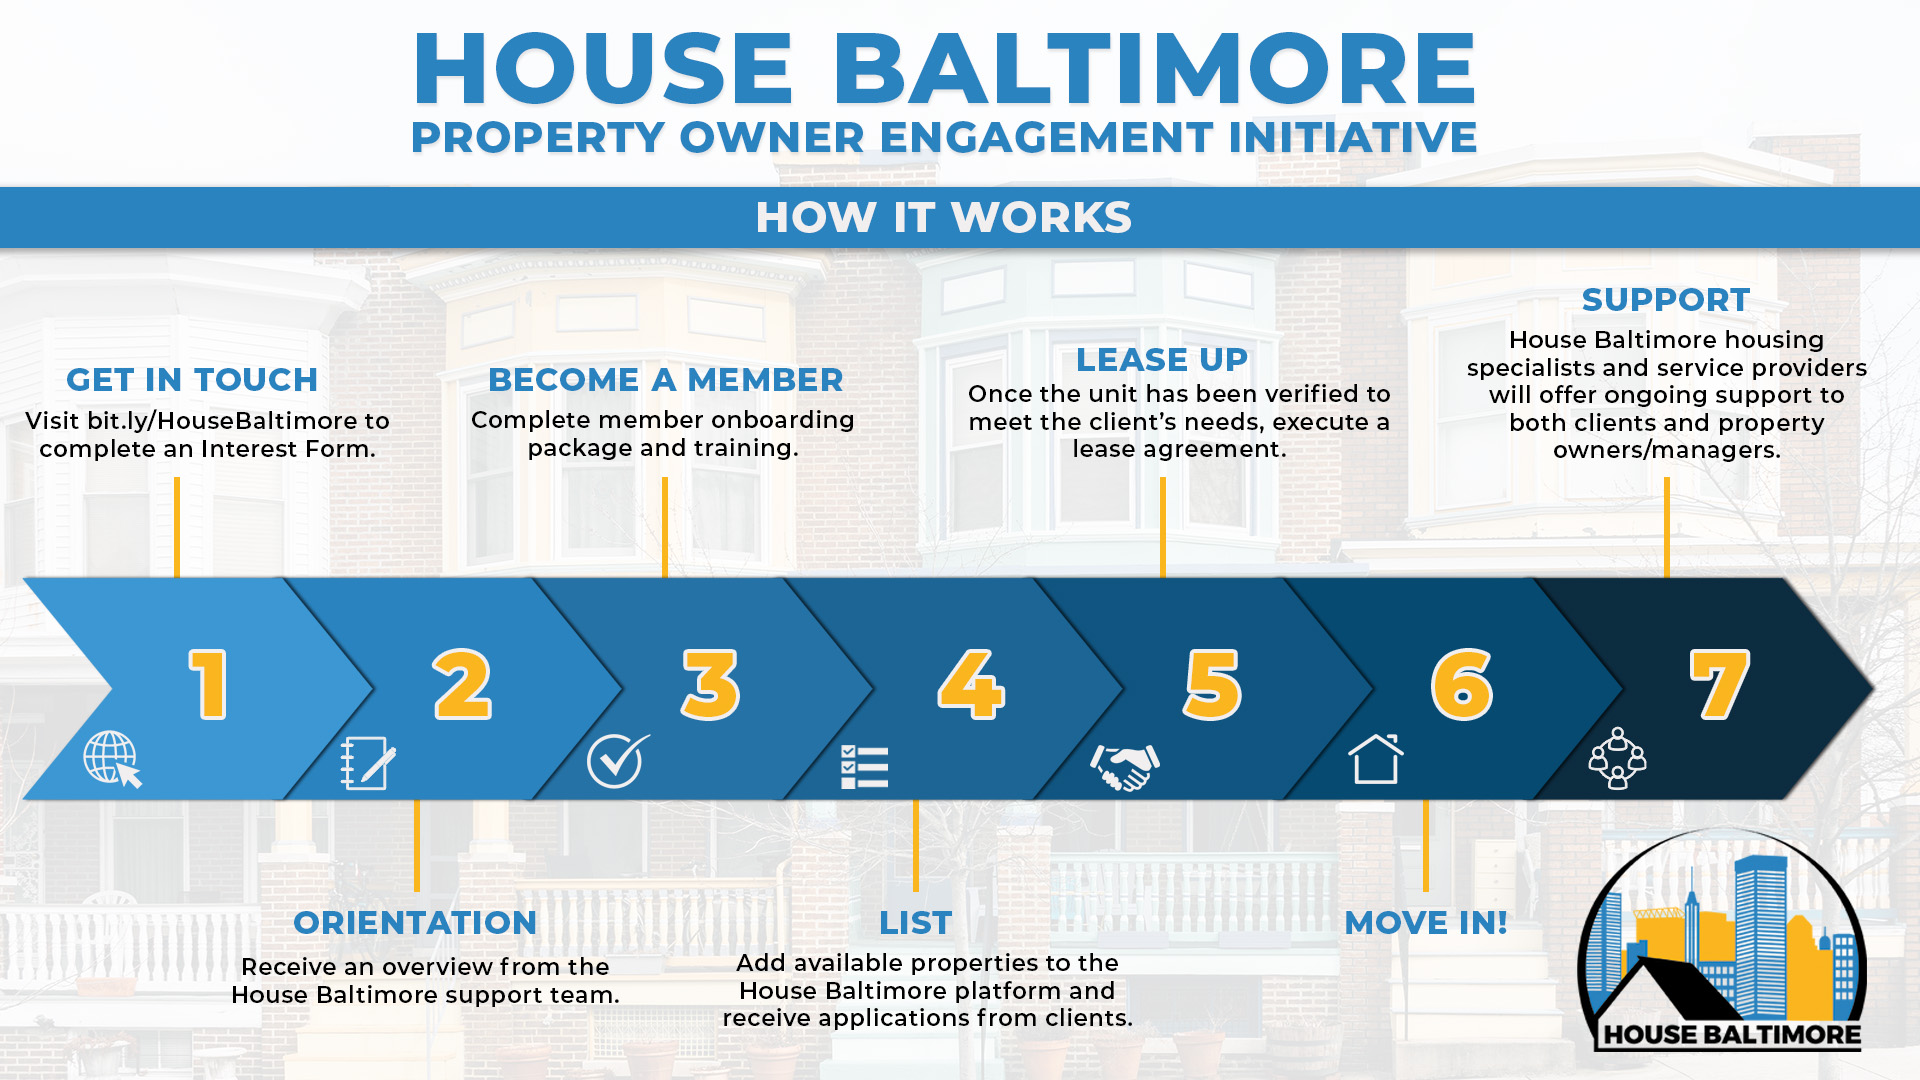 To become a House Baltimore member, first start by completing the House Baltimore Intake form. The House Baltimore support team will provide support and guidance from there.